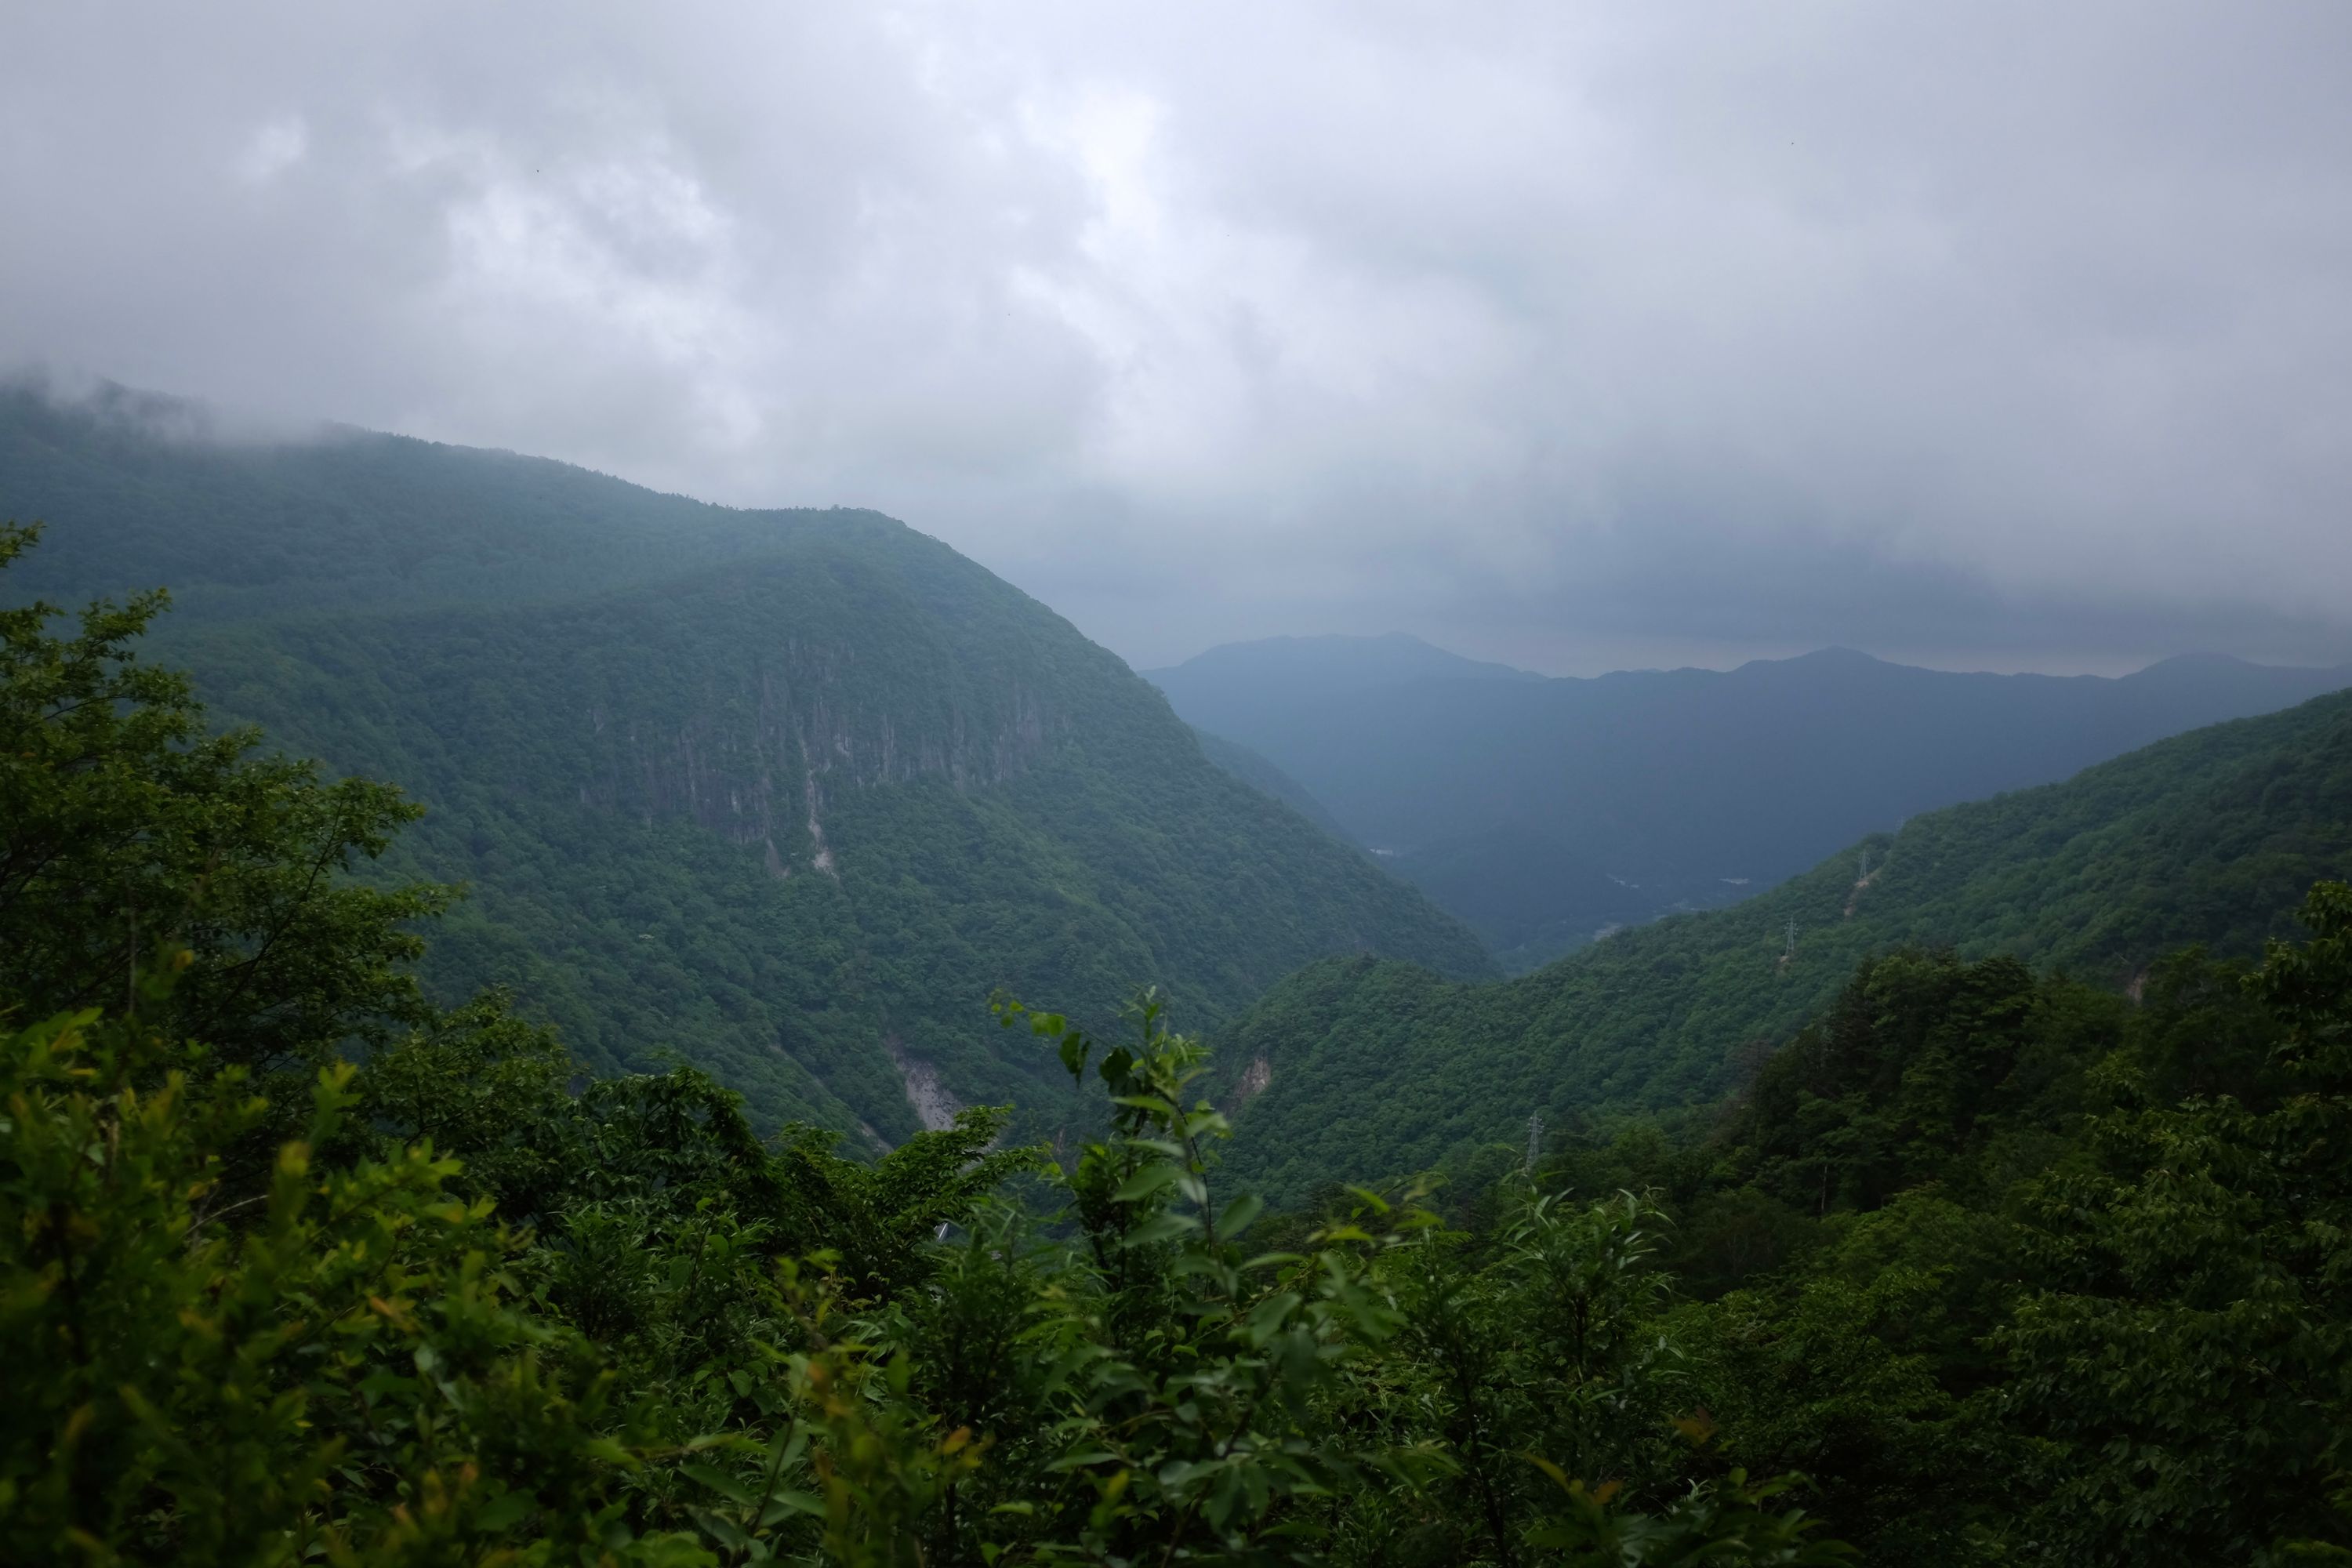 A panorama of a verdant, cloudy landscape with steep rock walls covered in thick forest.